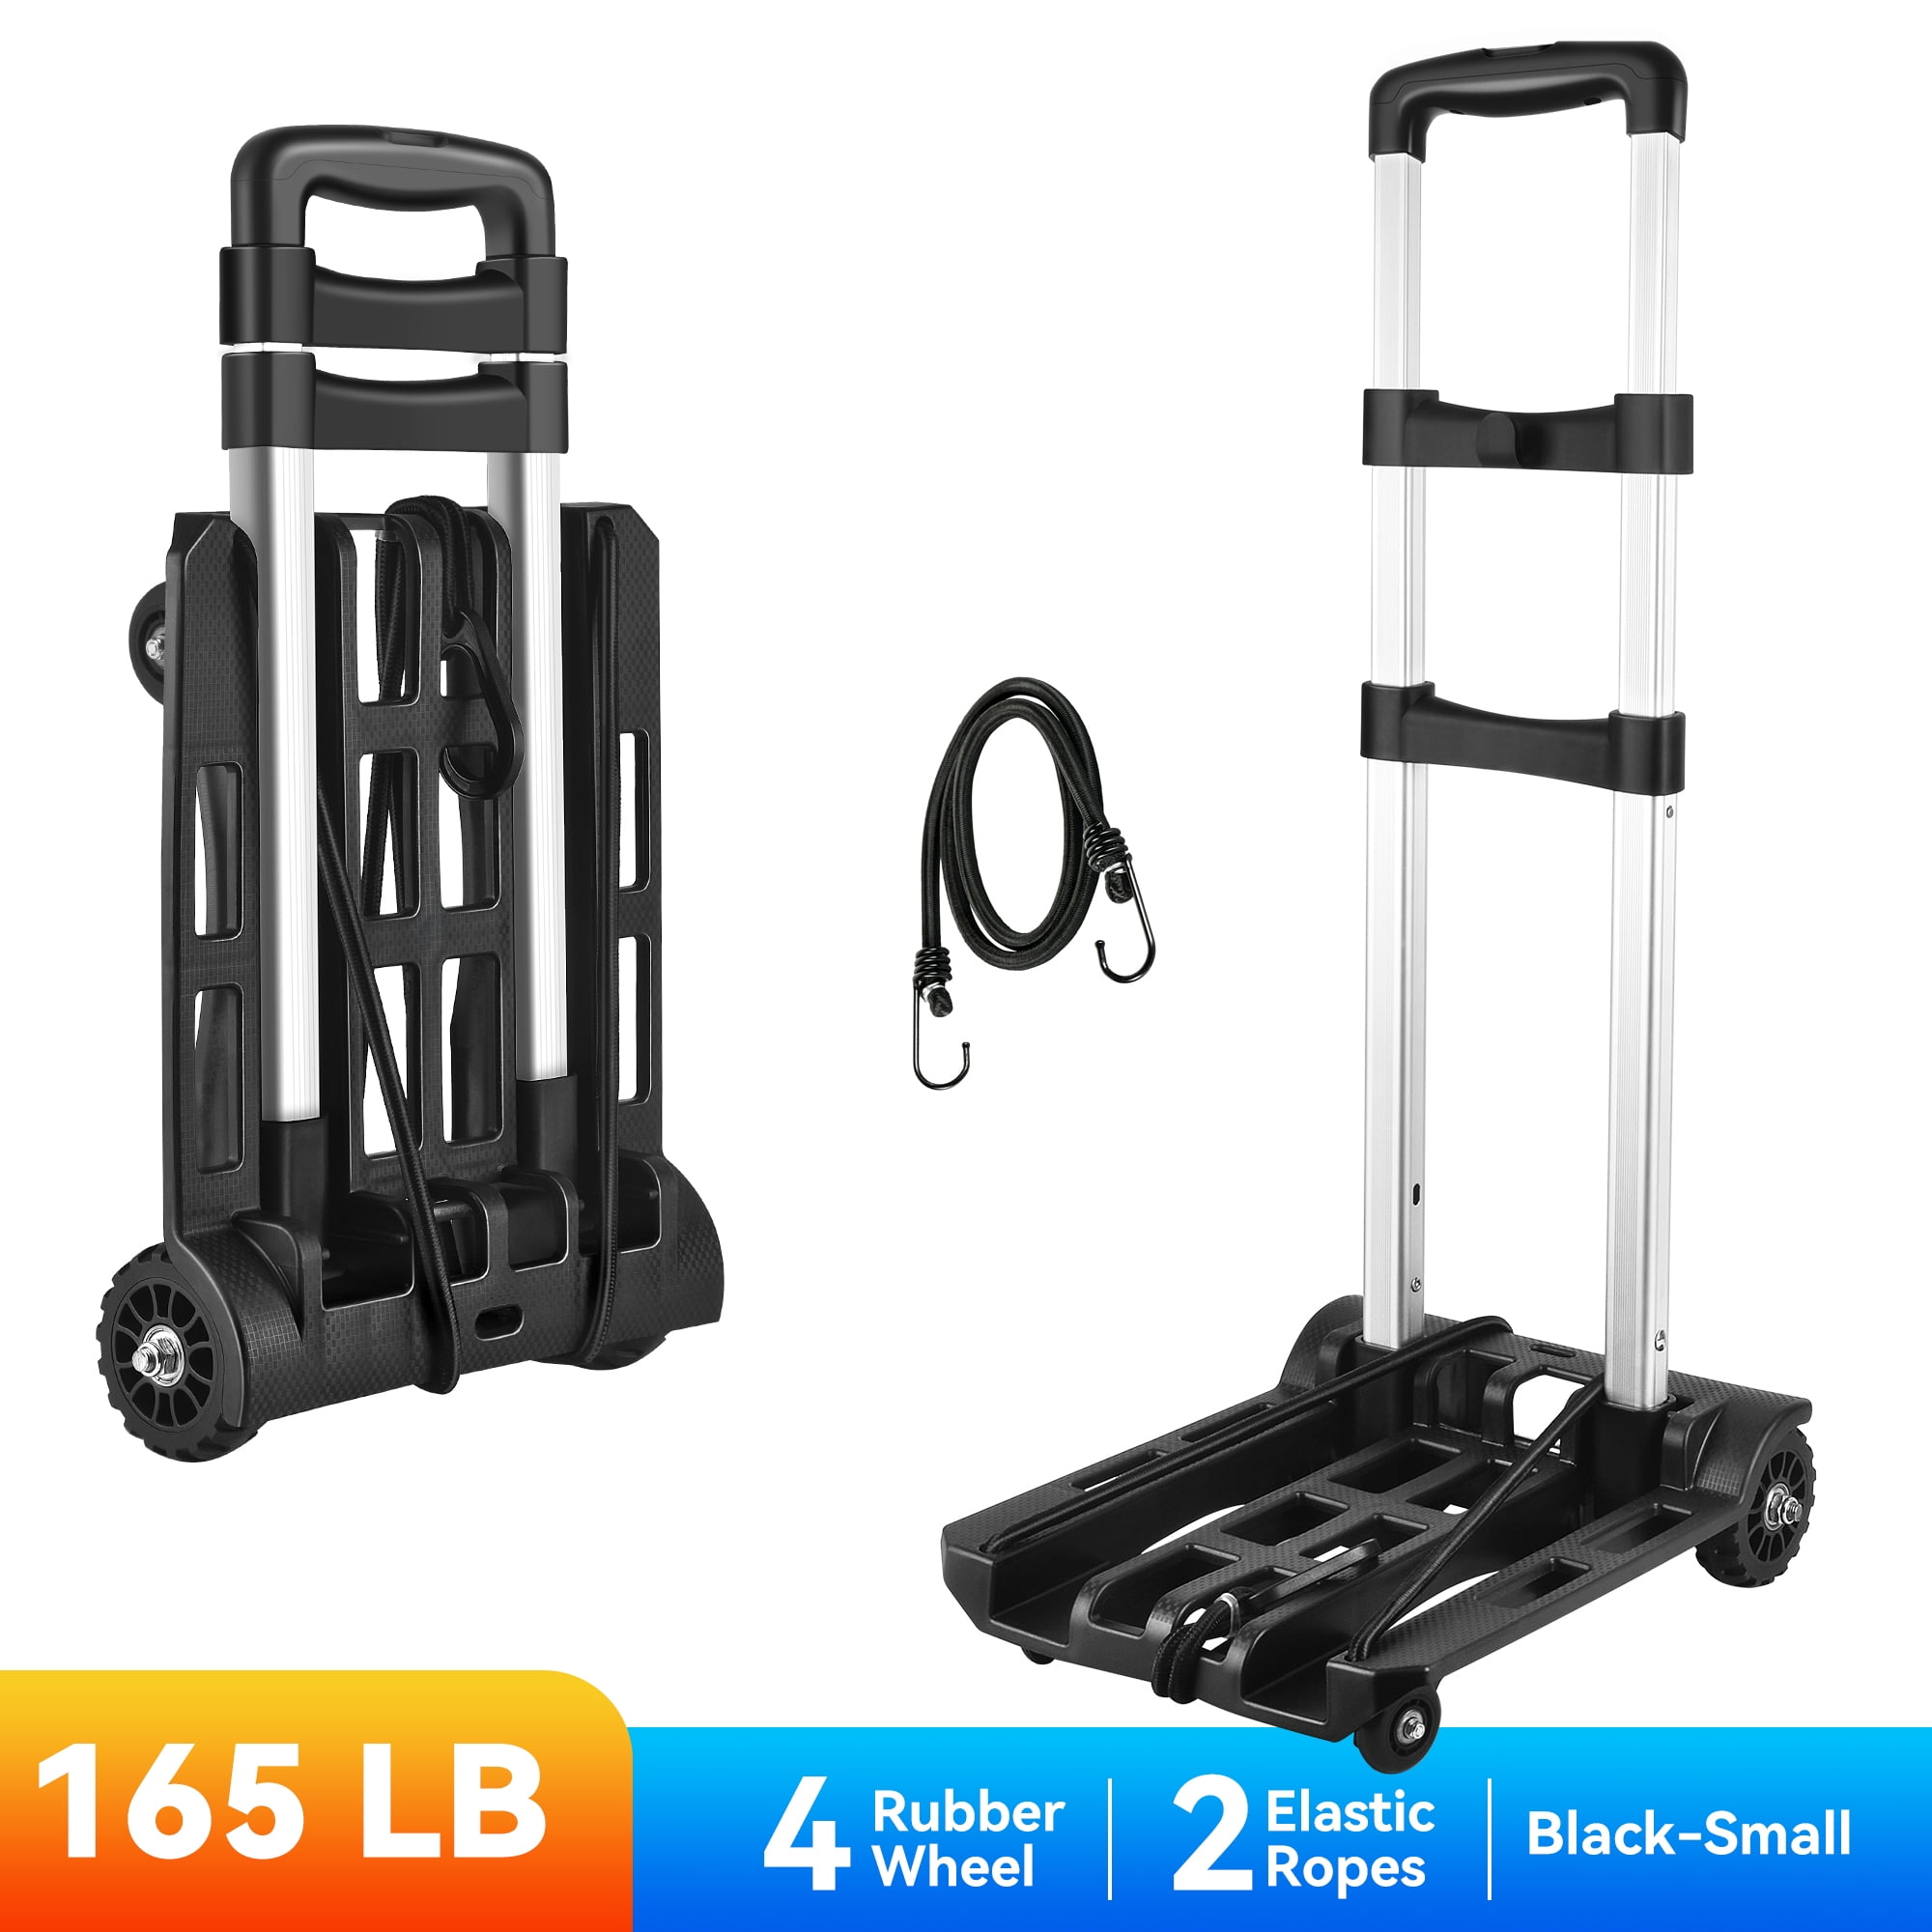 Compare prices for SHOULDER DOLLY across all European  stores